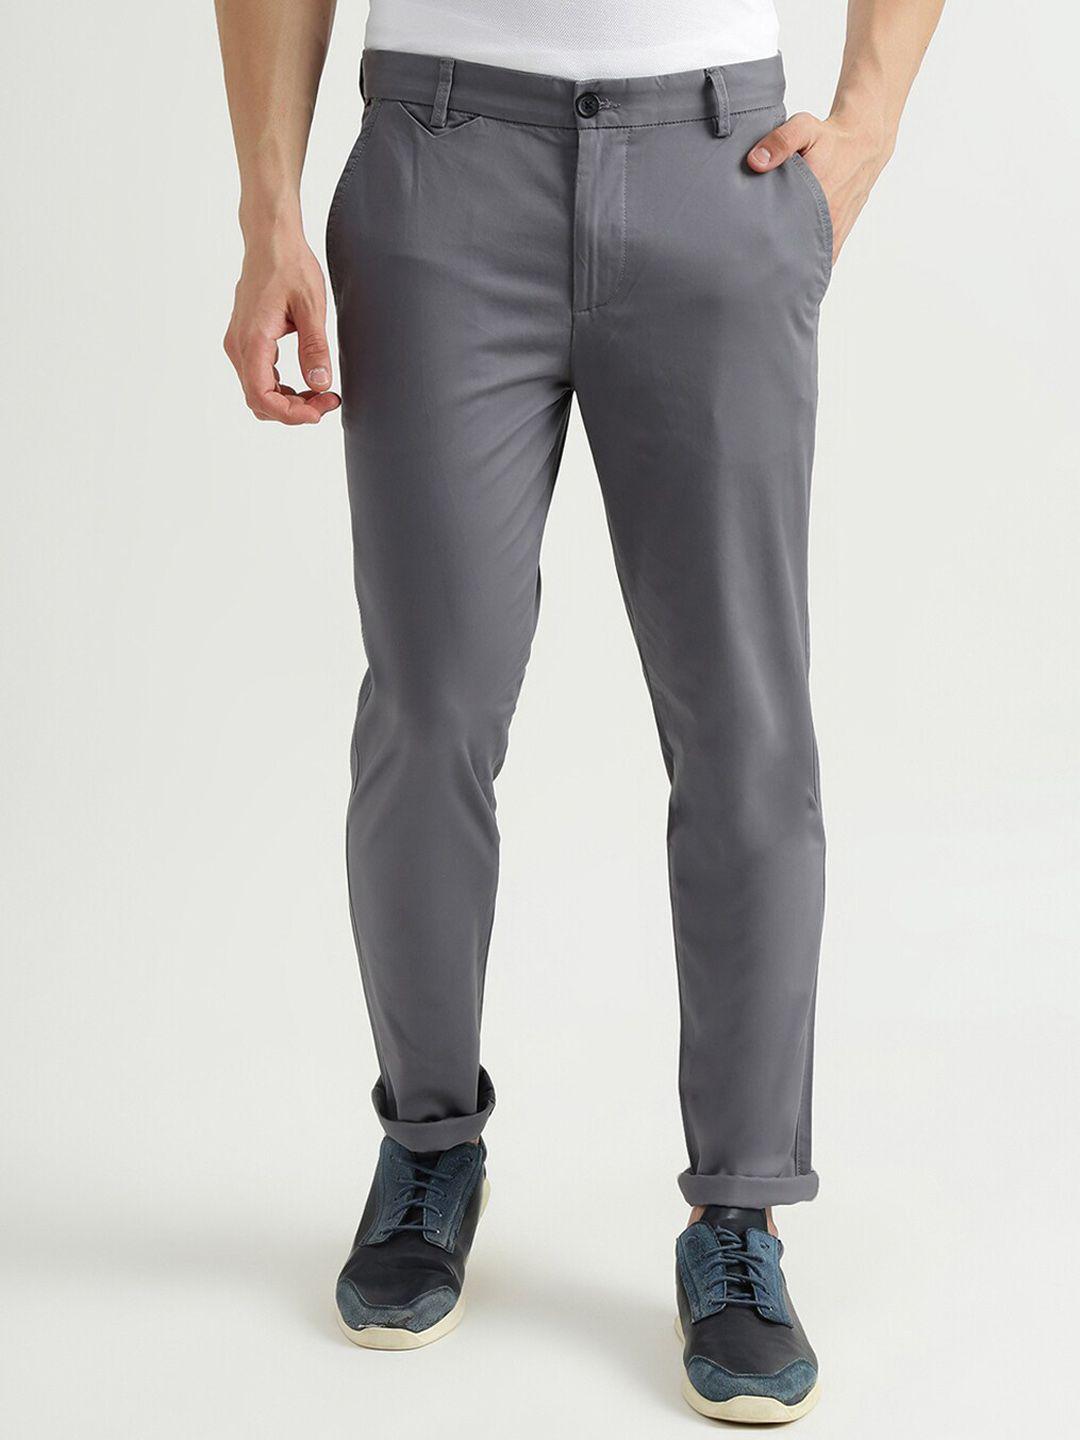 united-colors-of-benetton-men-grey-cotton-solid-slim-fit-trousers